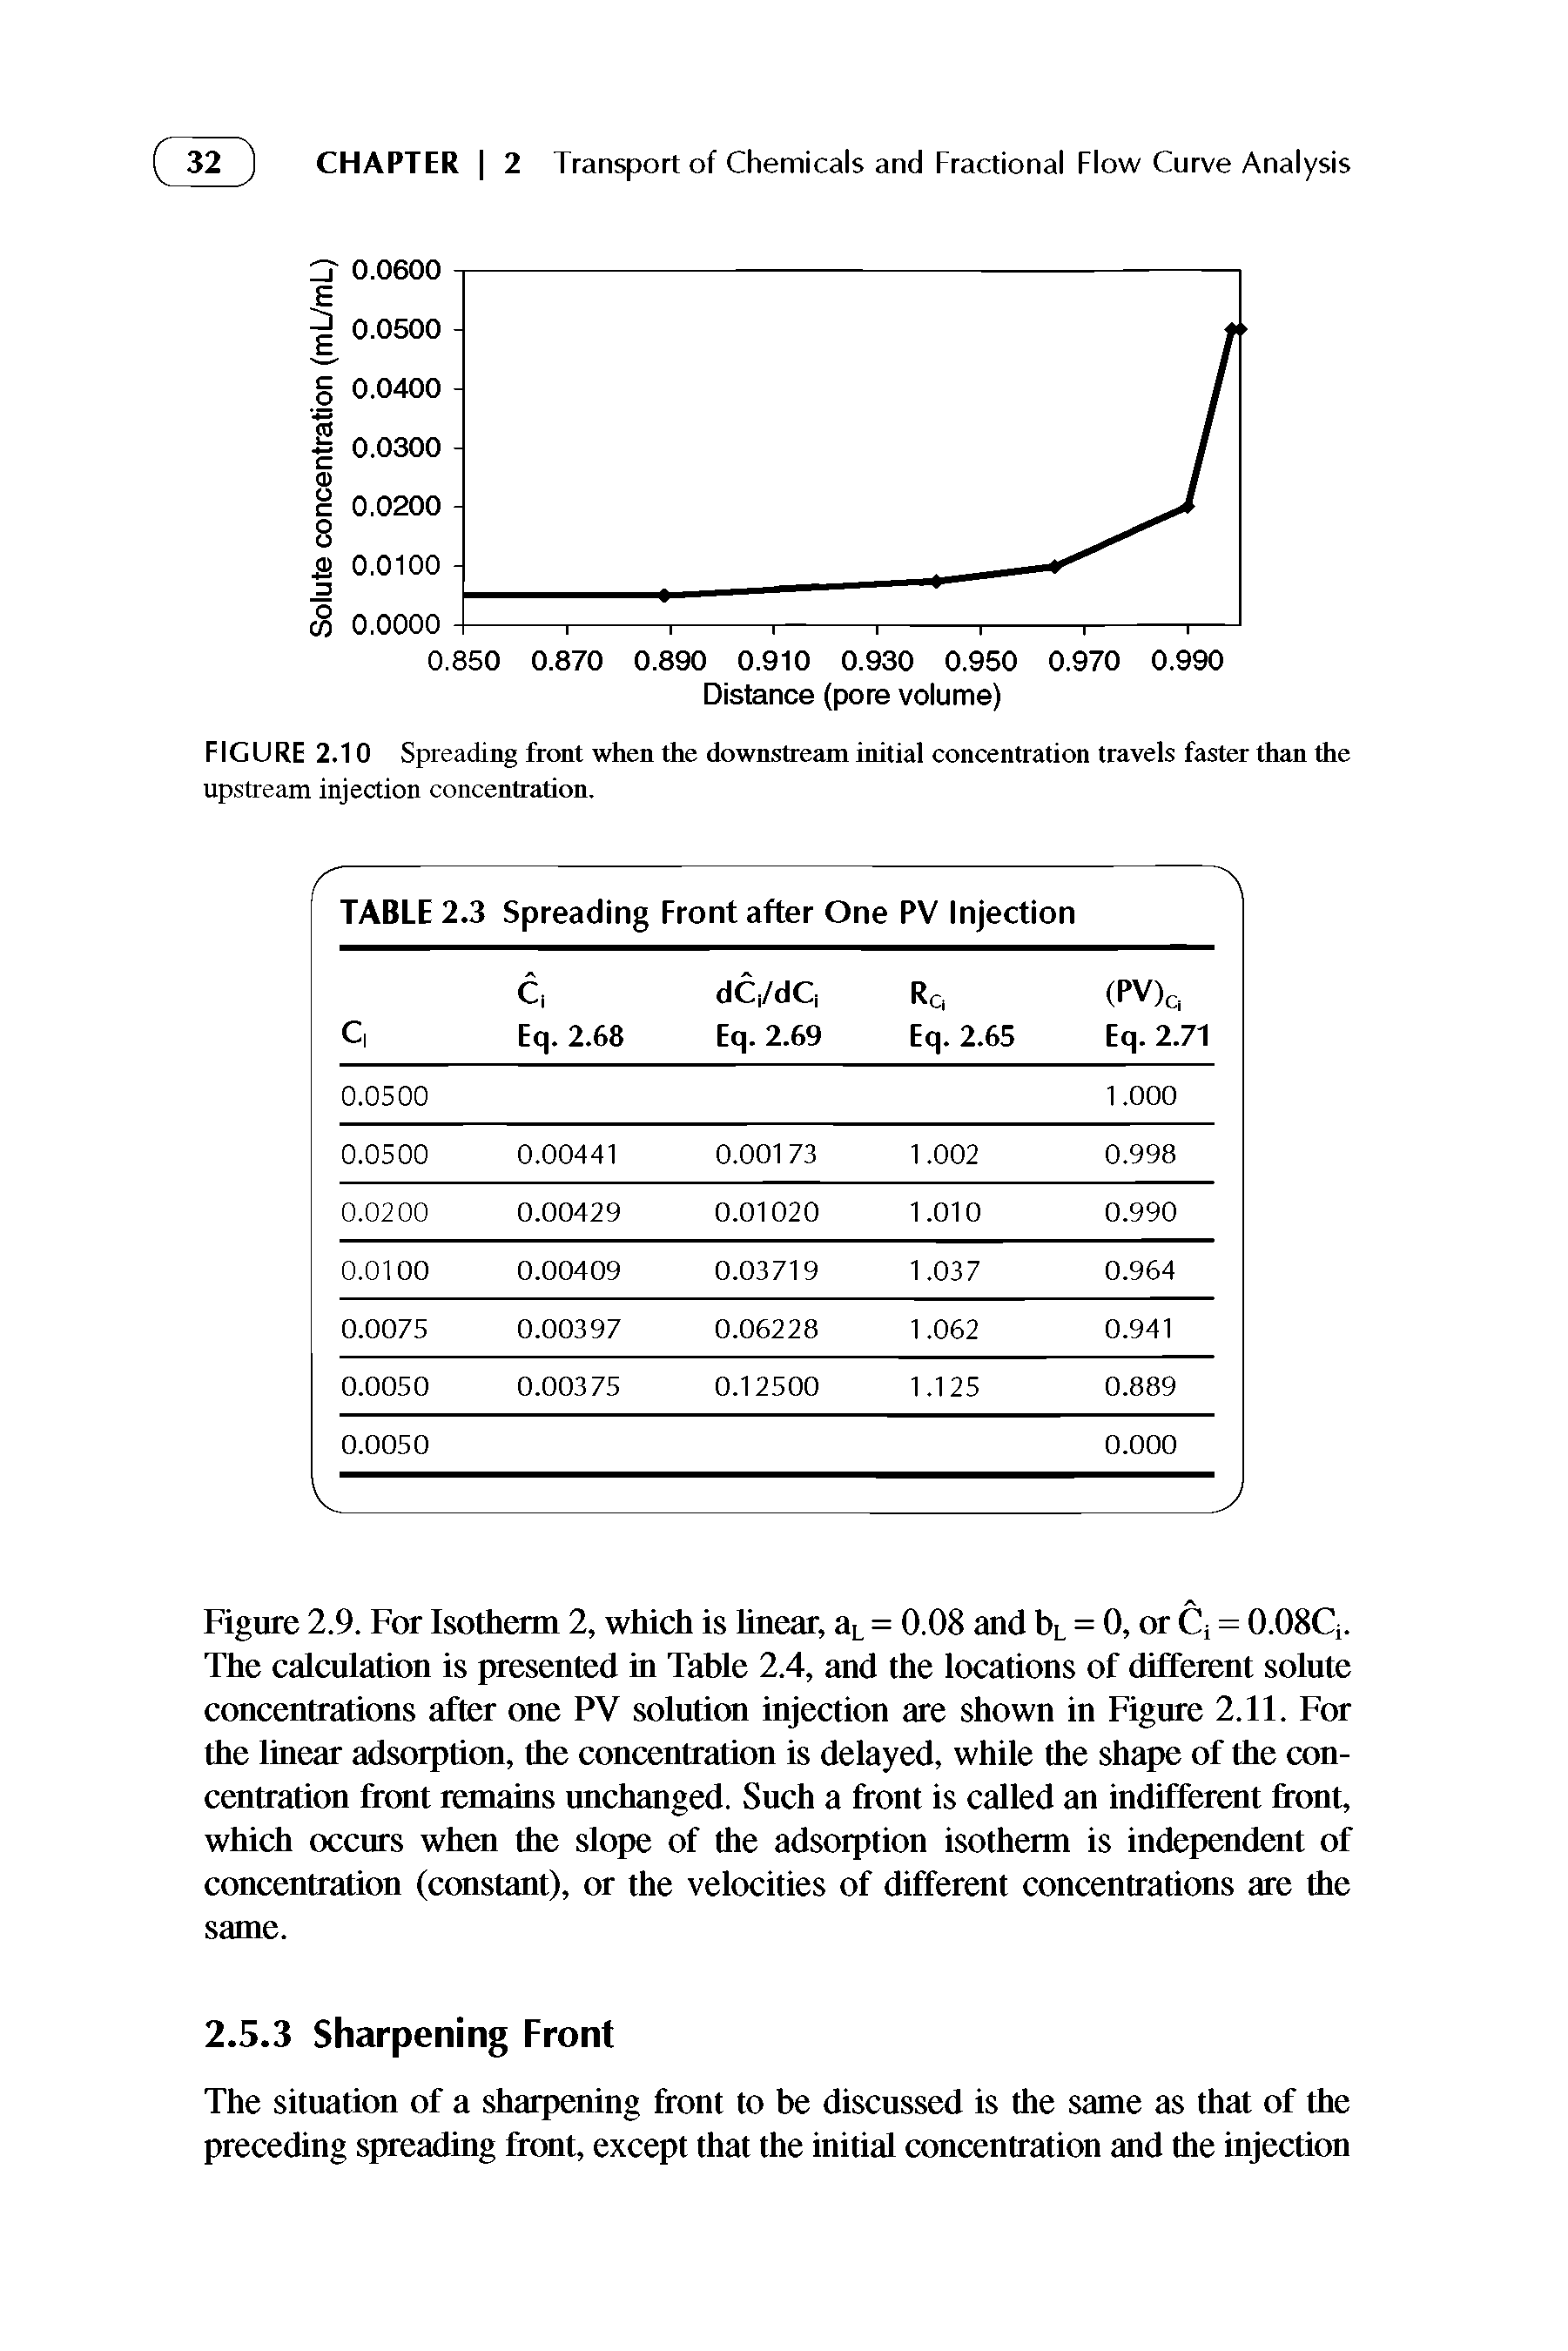 Figure 2.9. For Isotherm 2, which is hnear, = 0.08 and 5l = 0, or Cj = 0.08Q. The calculation is presented in Table 2.4, and the locations of different solute concentrations after one PV solution injection are shown in Figure 2.11. For the linear adsorption, the concentration is delayed, while the shape of the concentration front remains unchanged. Such a front is called an indifferent front, which occurs when the slope of the adsorption isotherm is independent of concentration (constant), or the velocities of different concentrations are the same.